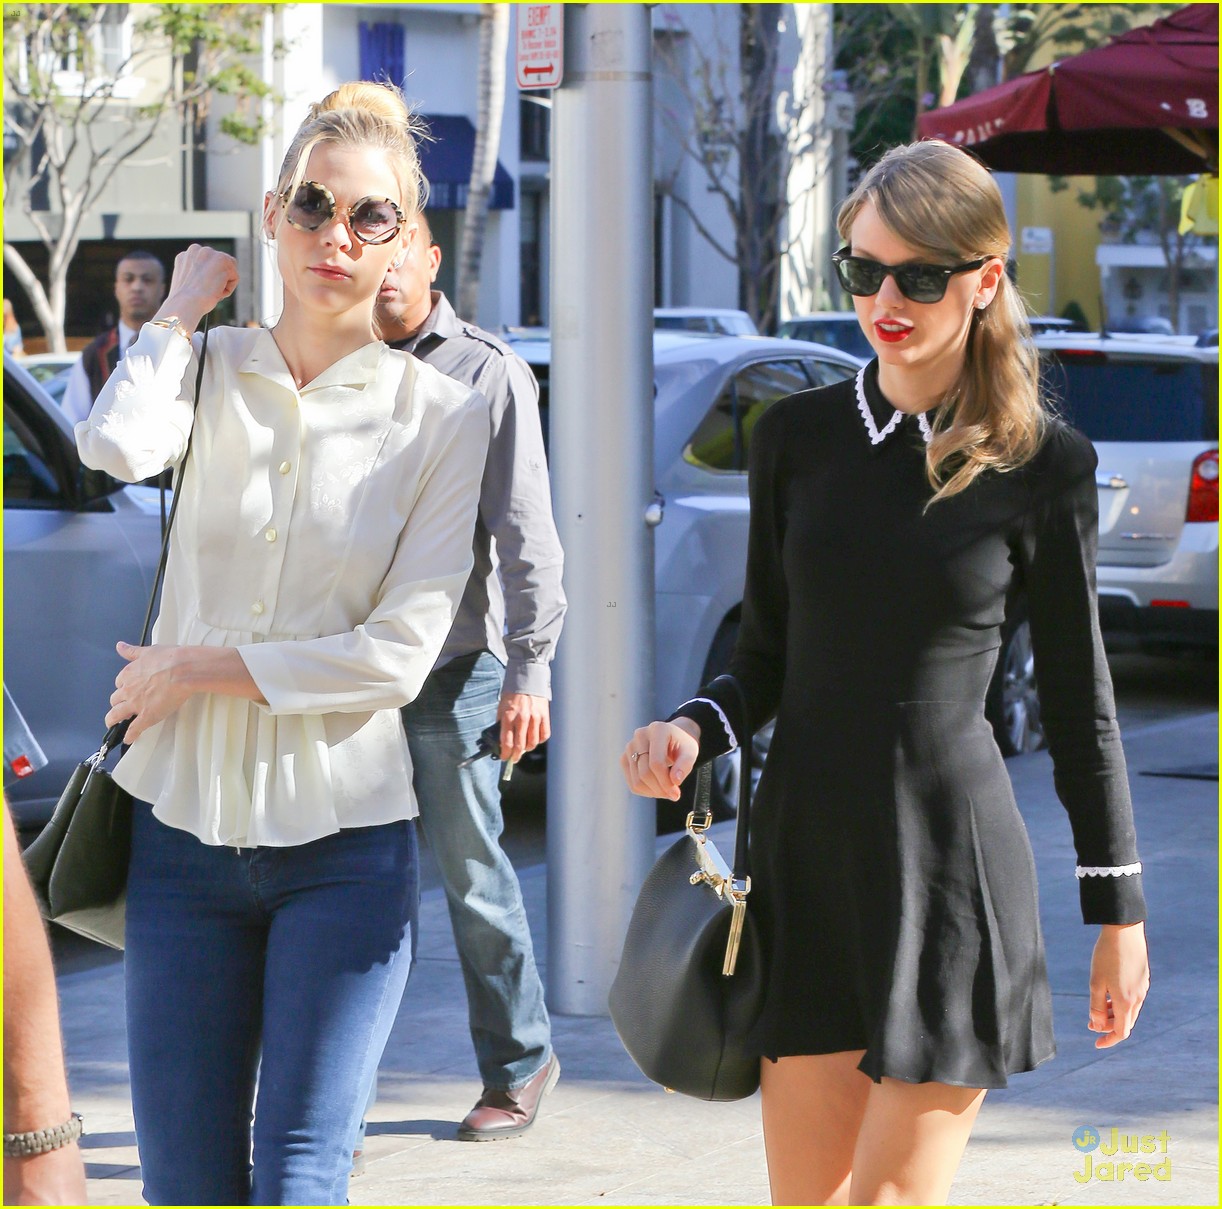 taylor swift bouchon lunch with new friend jaime king 12